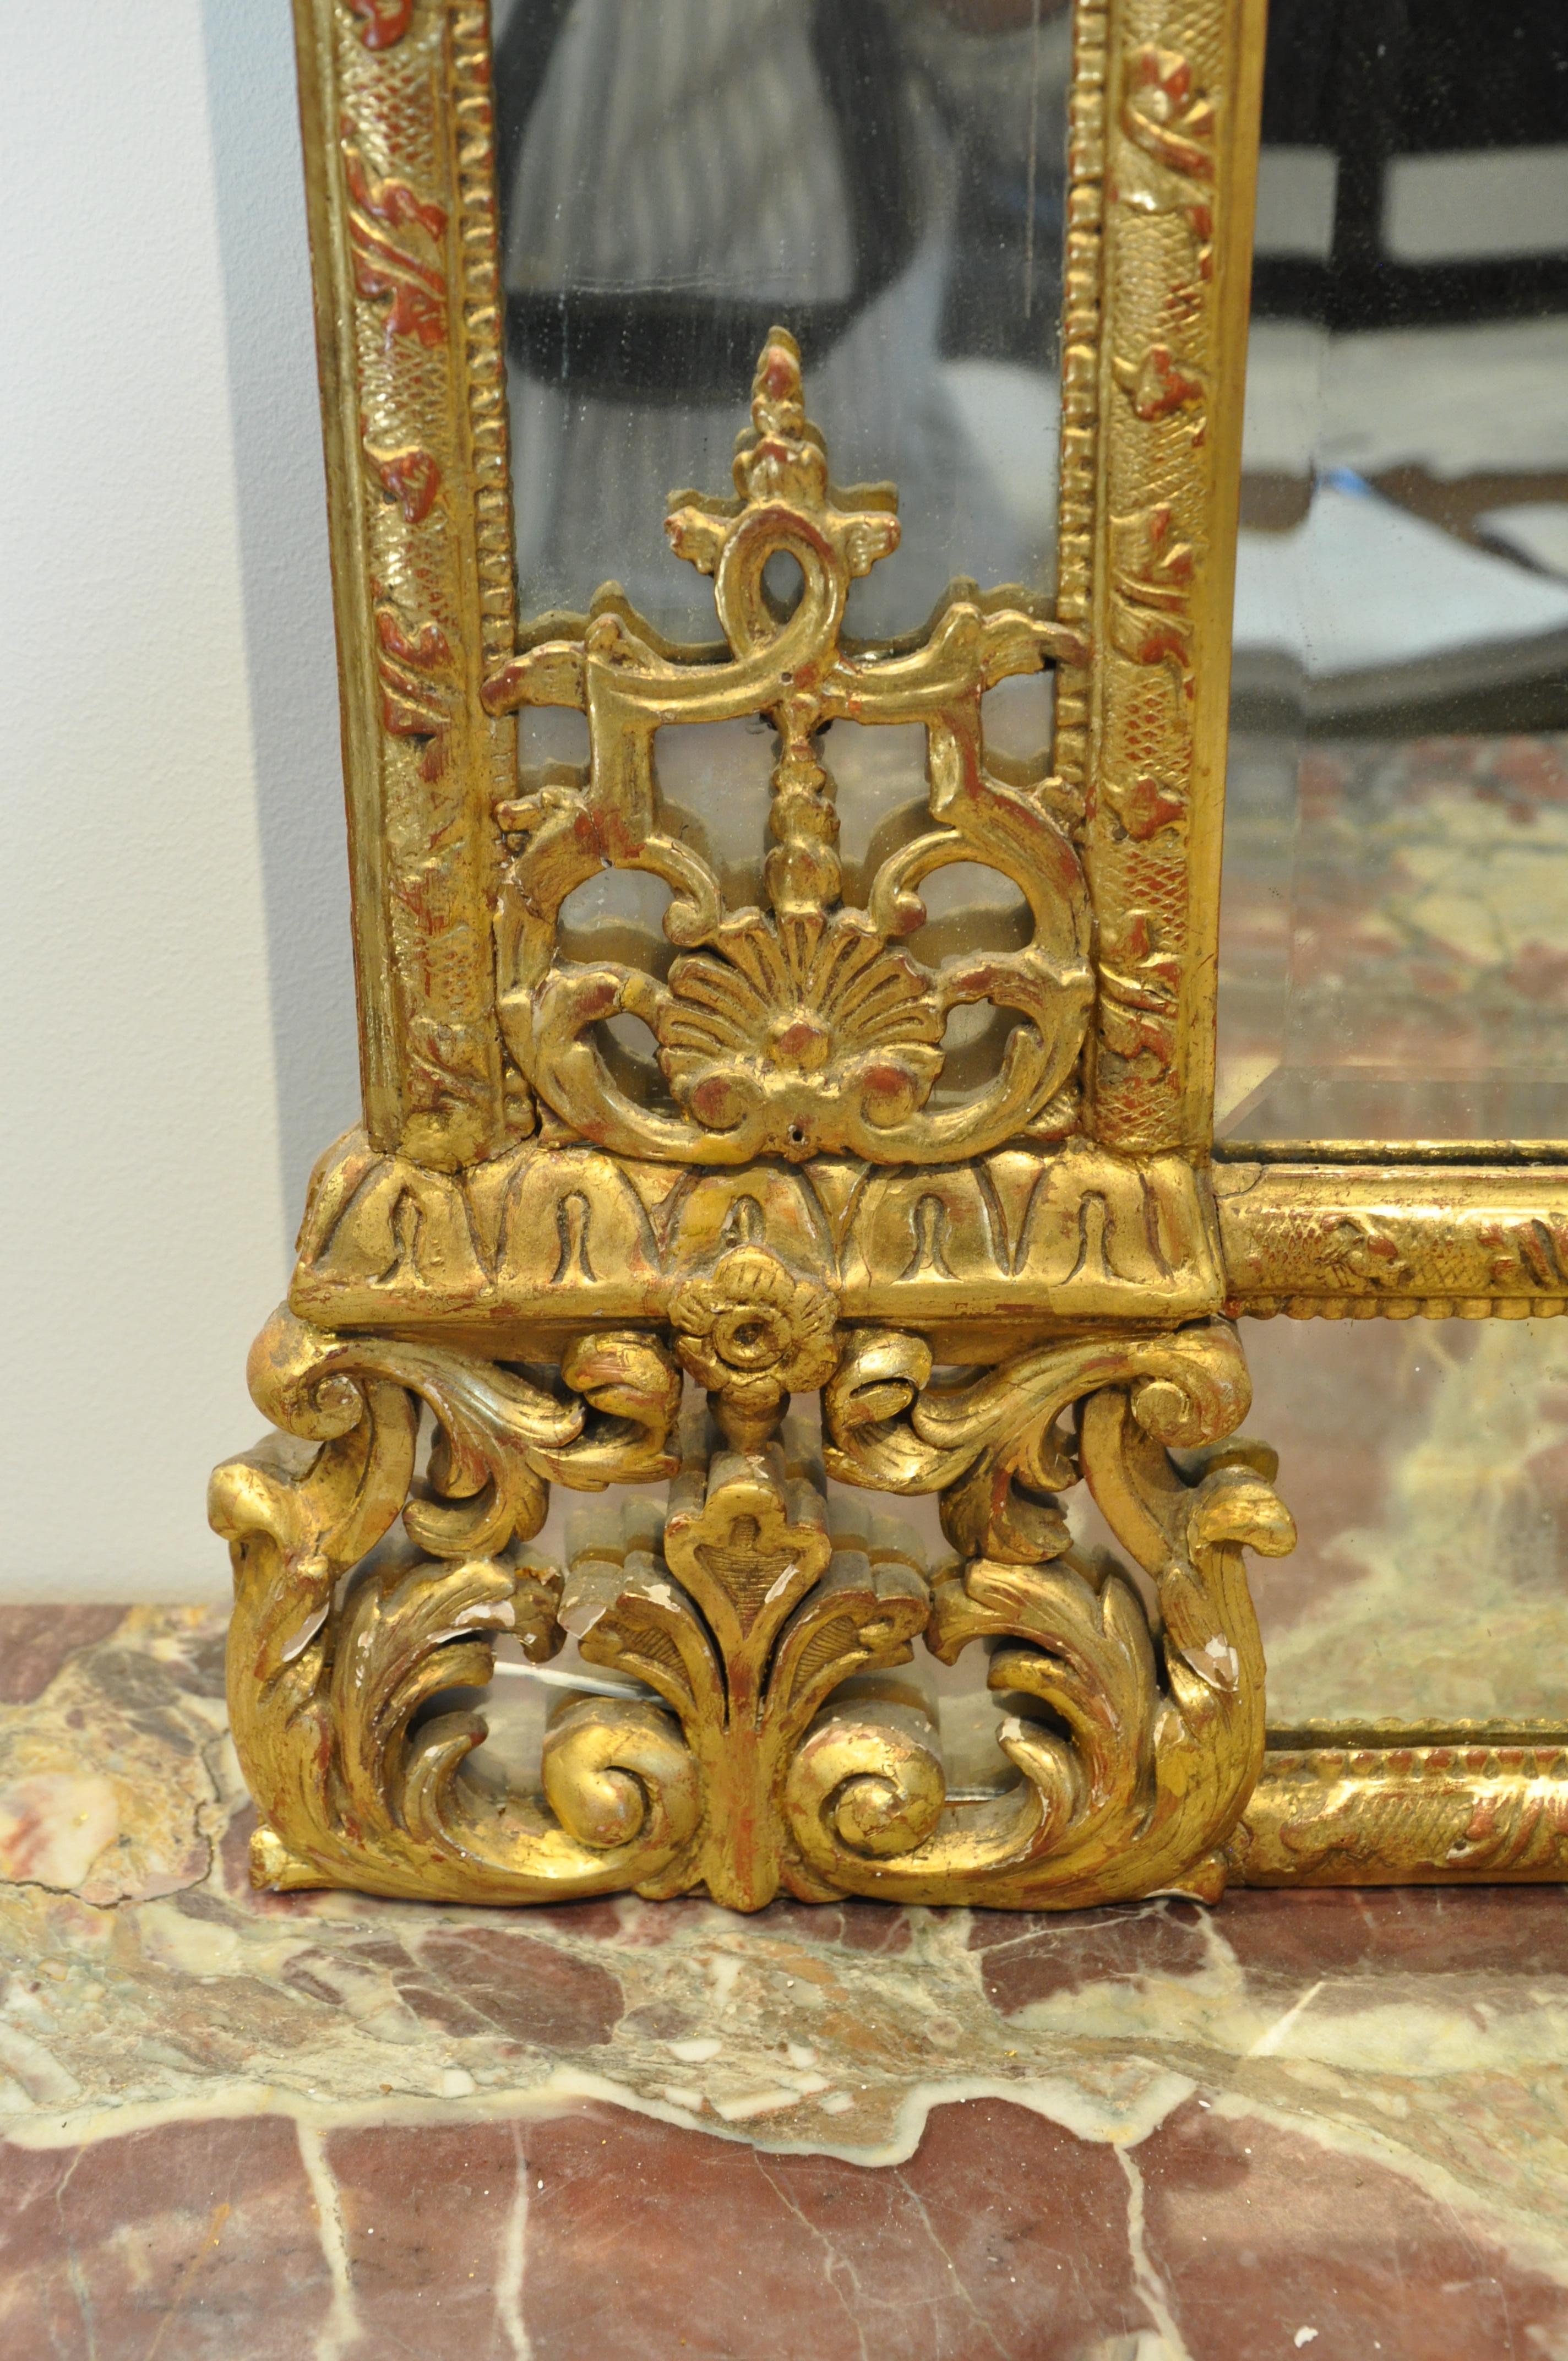 Giltwood Period Early 18th Century French Regence Gilt Mirror